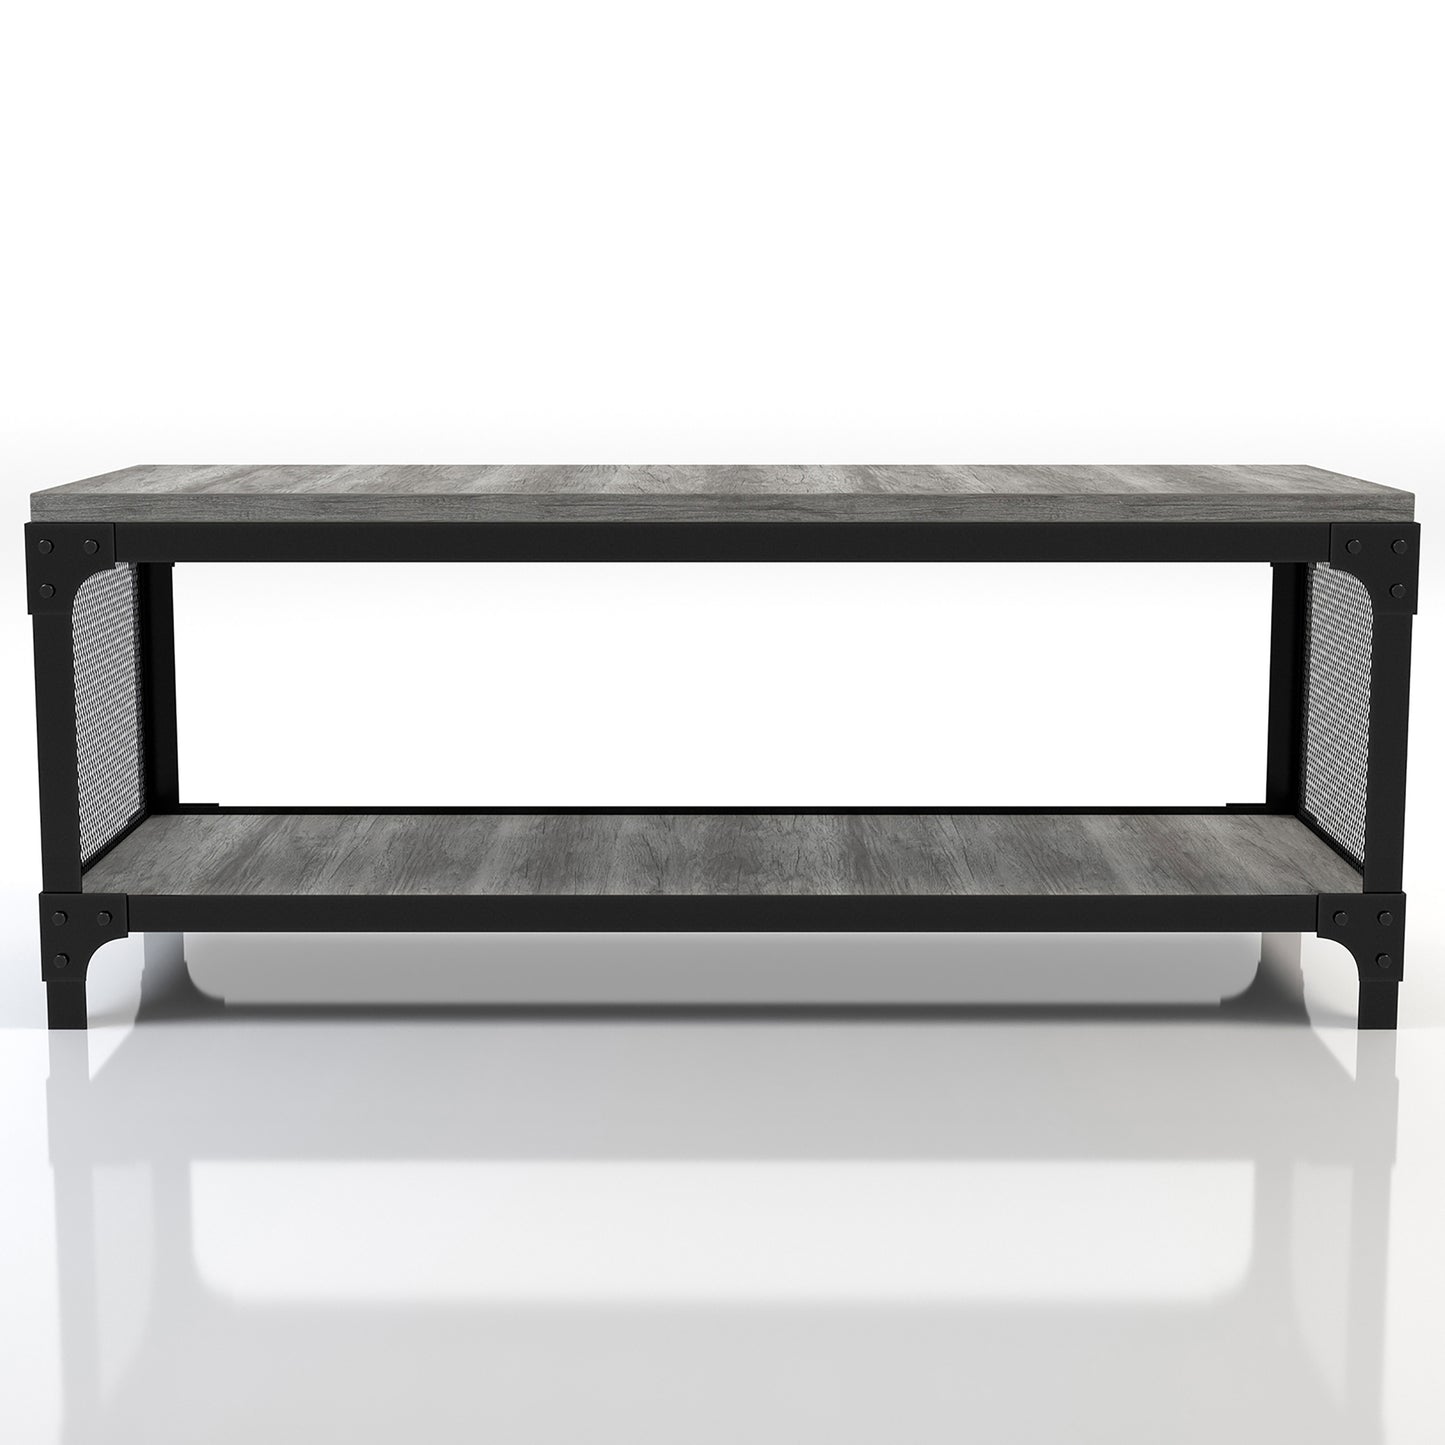 Front-facing industrial vintage gray oak shoe storage bench with a shelf on a white background